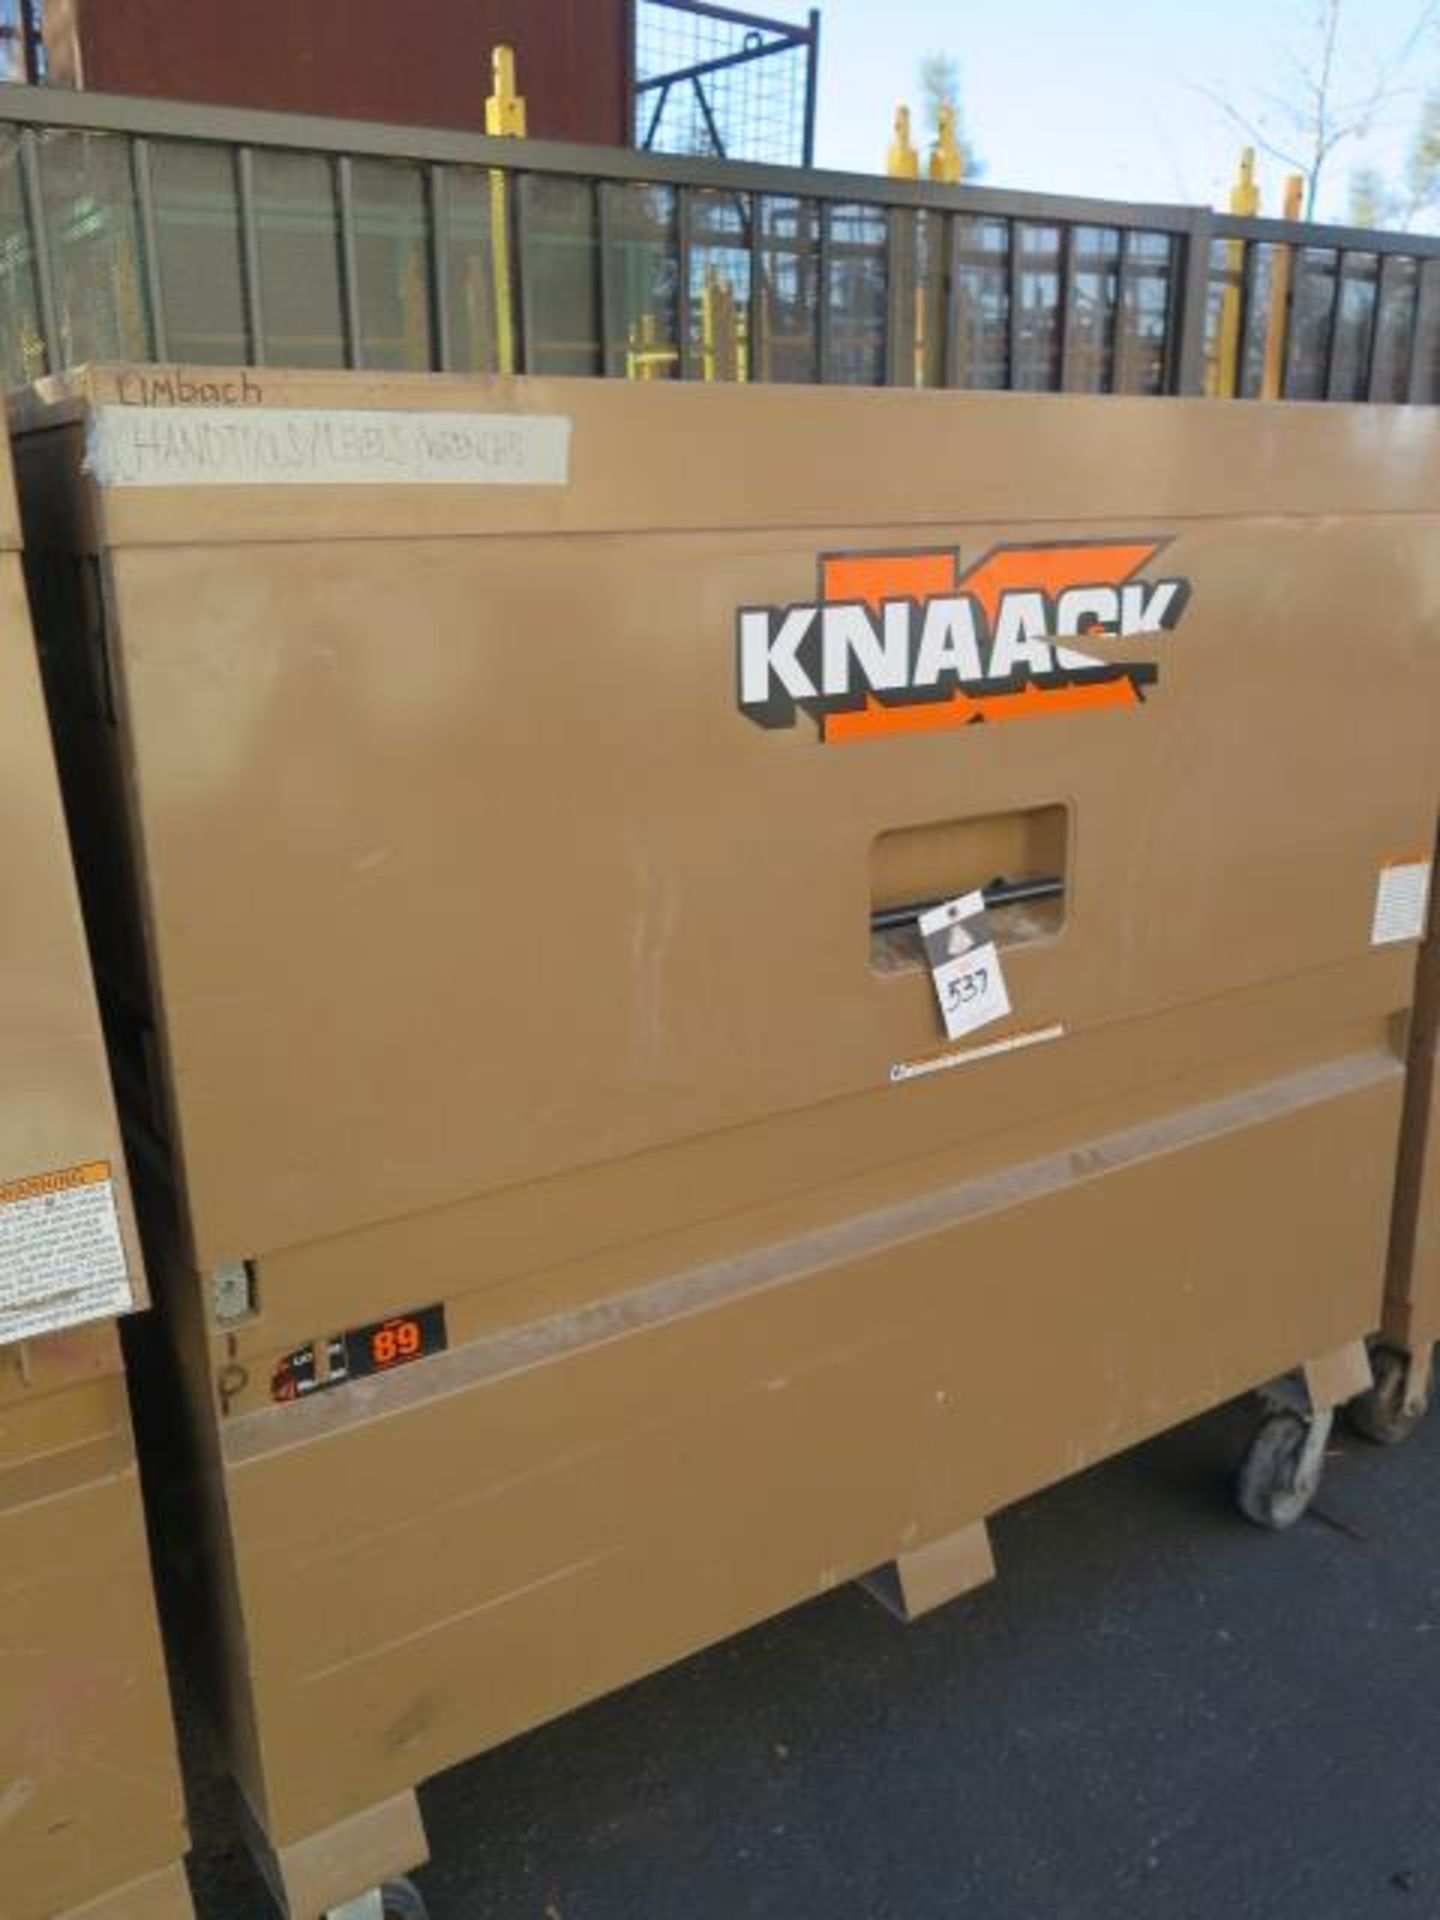 Knaack mdl. 89 "Storage Master" Rolling Job Box (SOLD AS-IS - NO WARRANTY) - Image 2 of 6